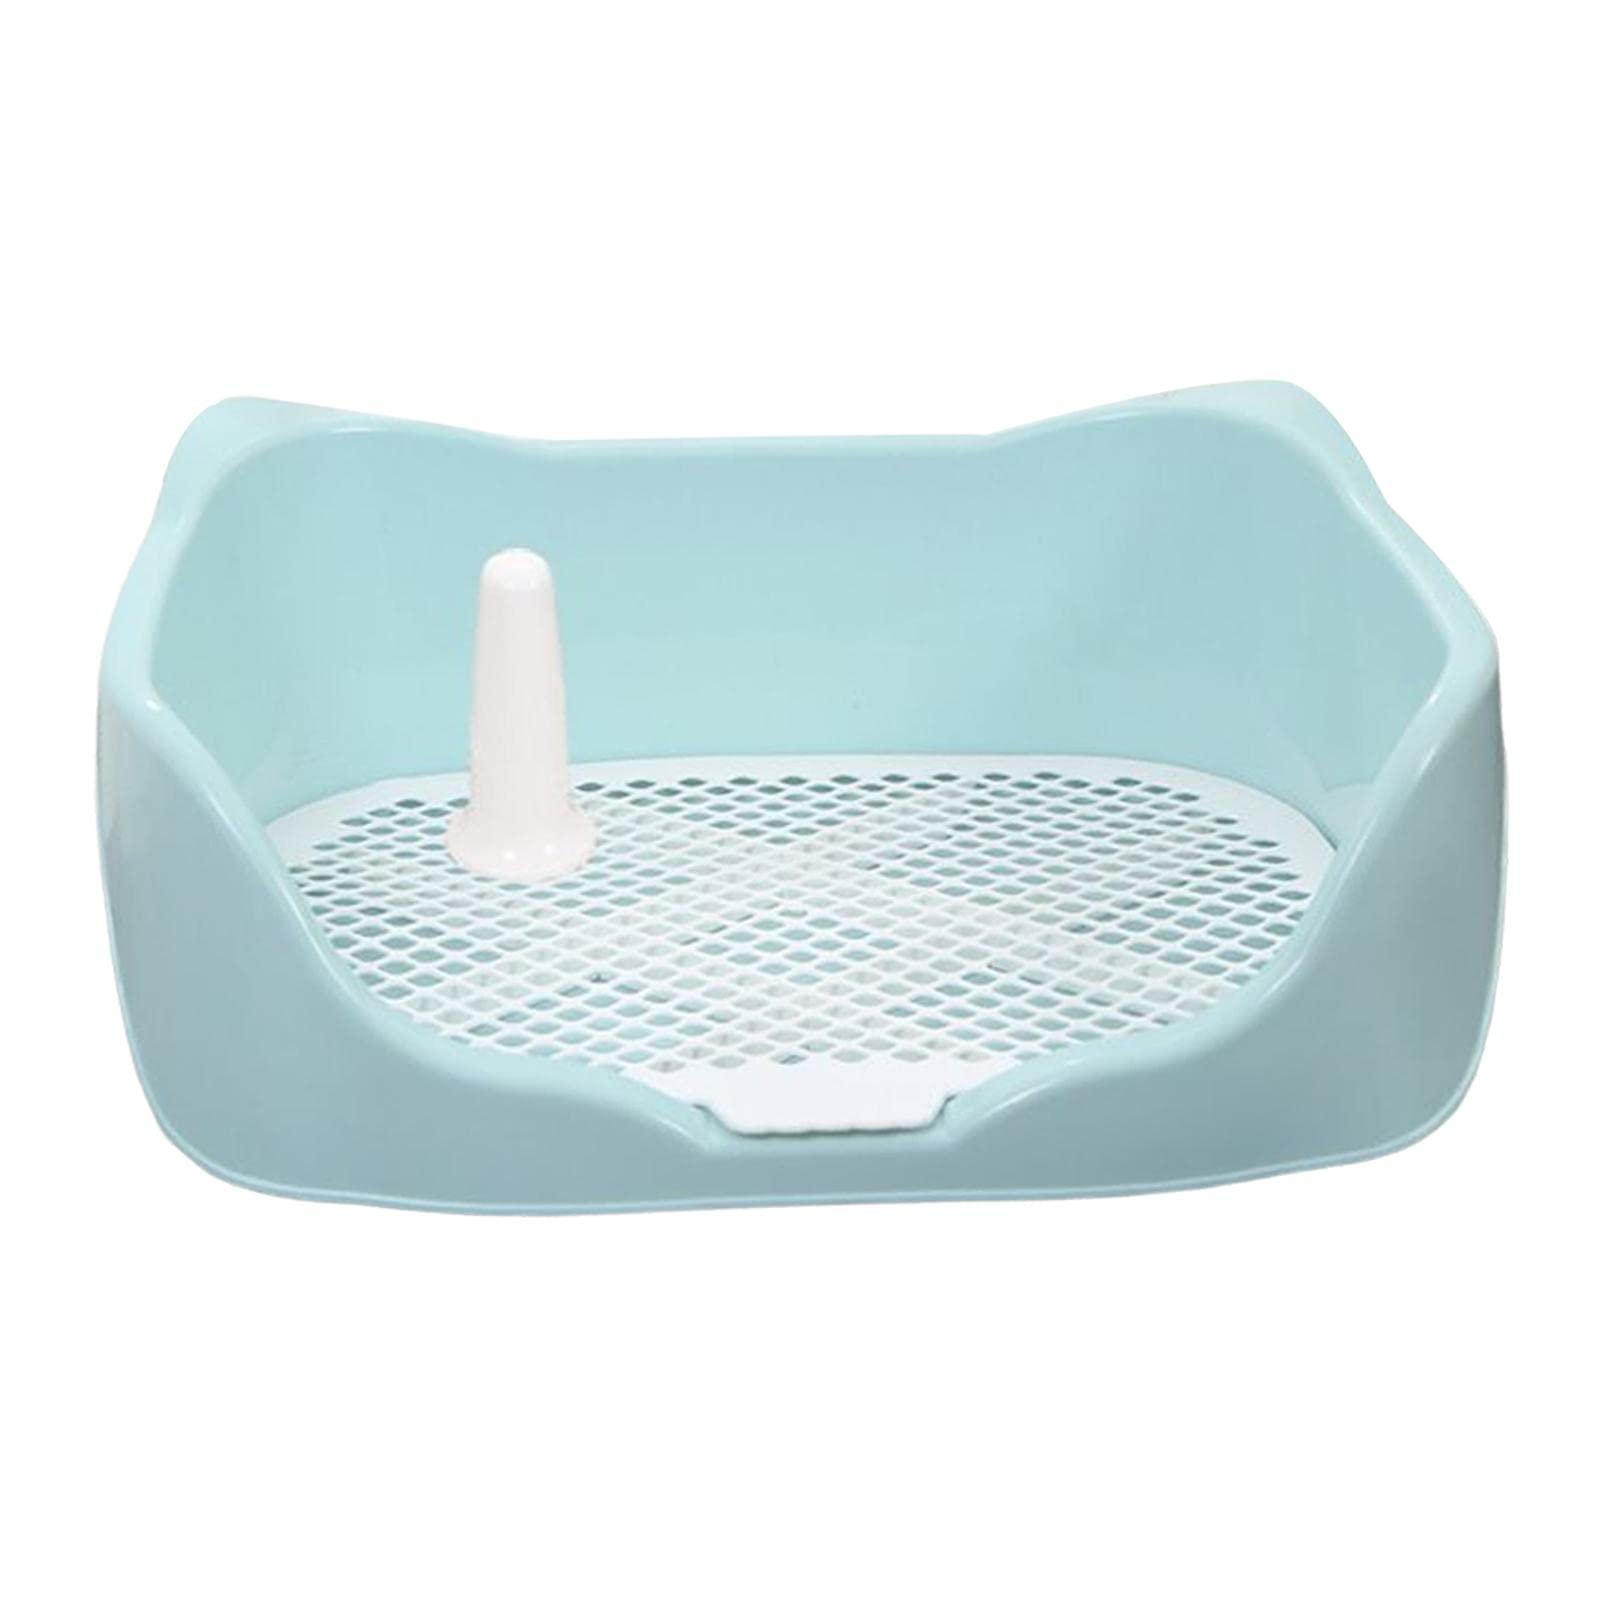 Dog Potty Tray With Removable Pee Post Three Side Wall Accessories Dog Pad Holder Tray, Keep Paws Dry And Clean Dog Training Toilet, Sky Blue